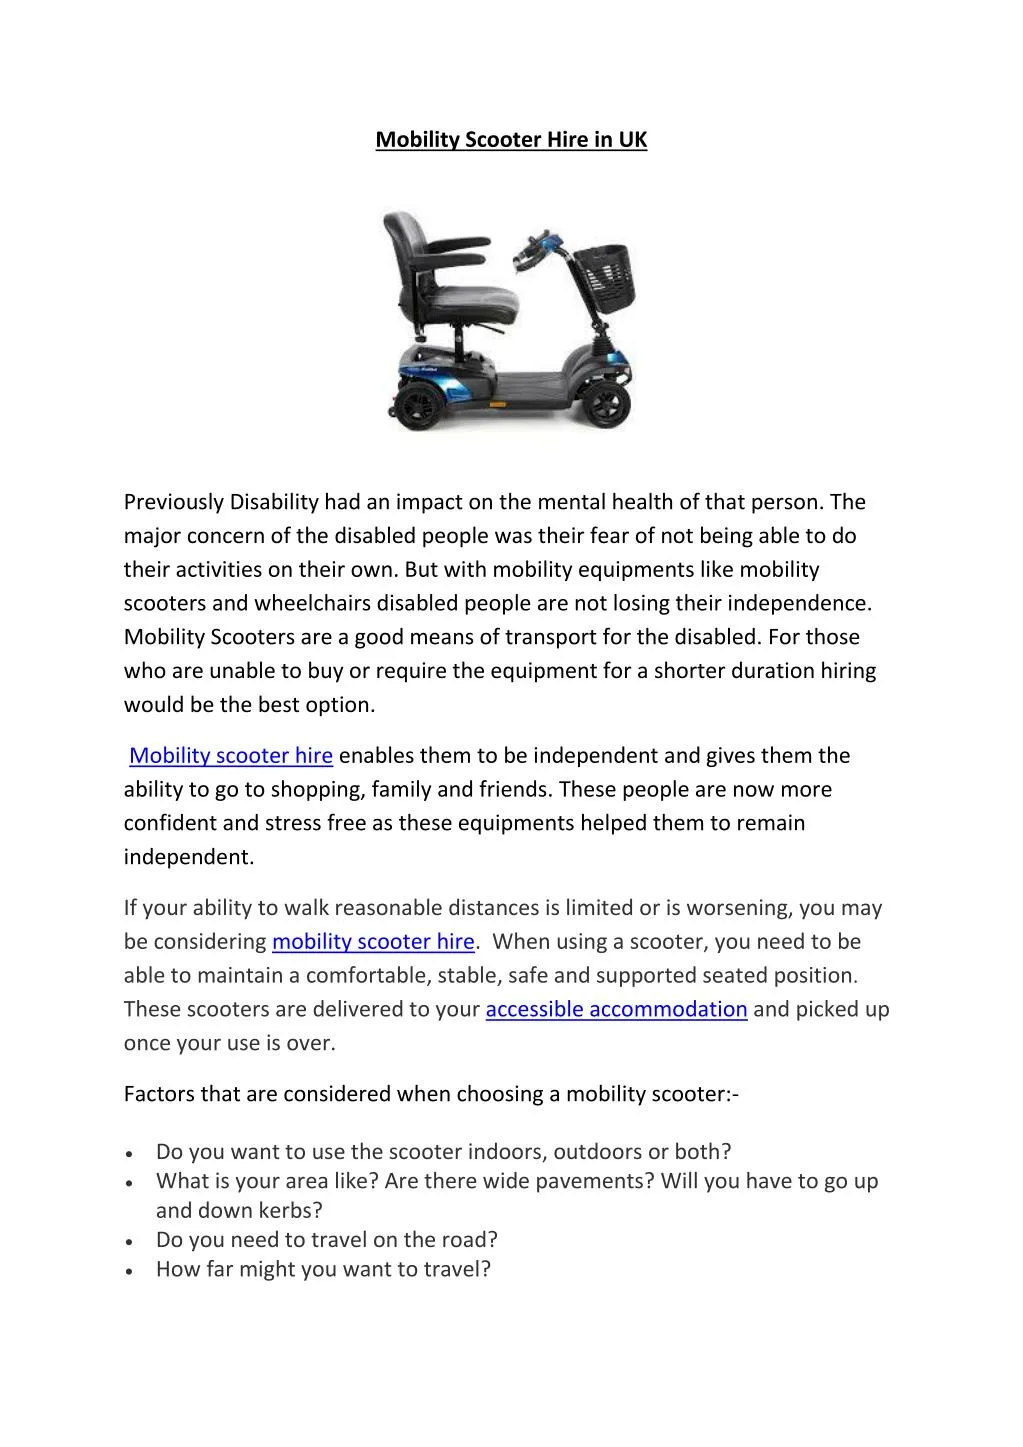 mobility scooter hire in uk